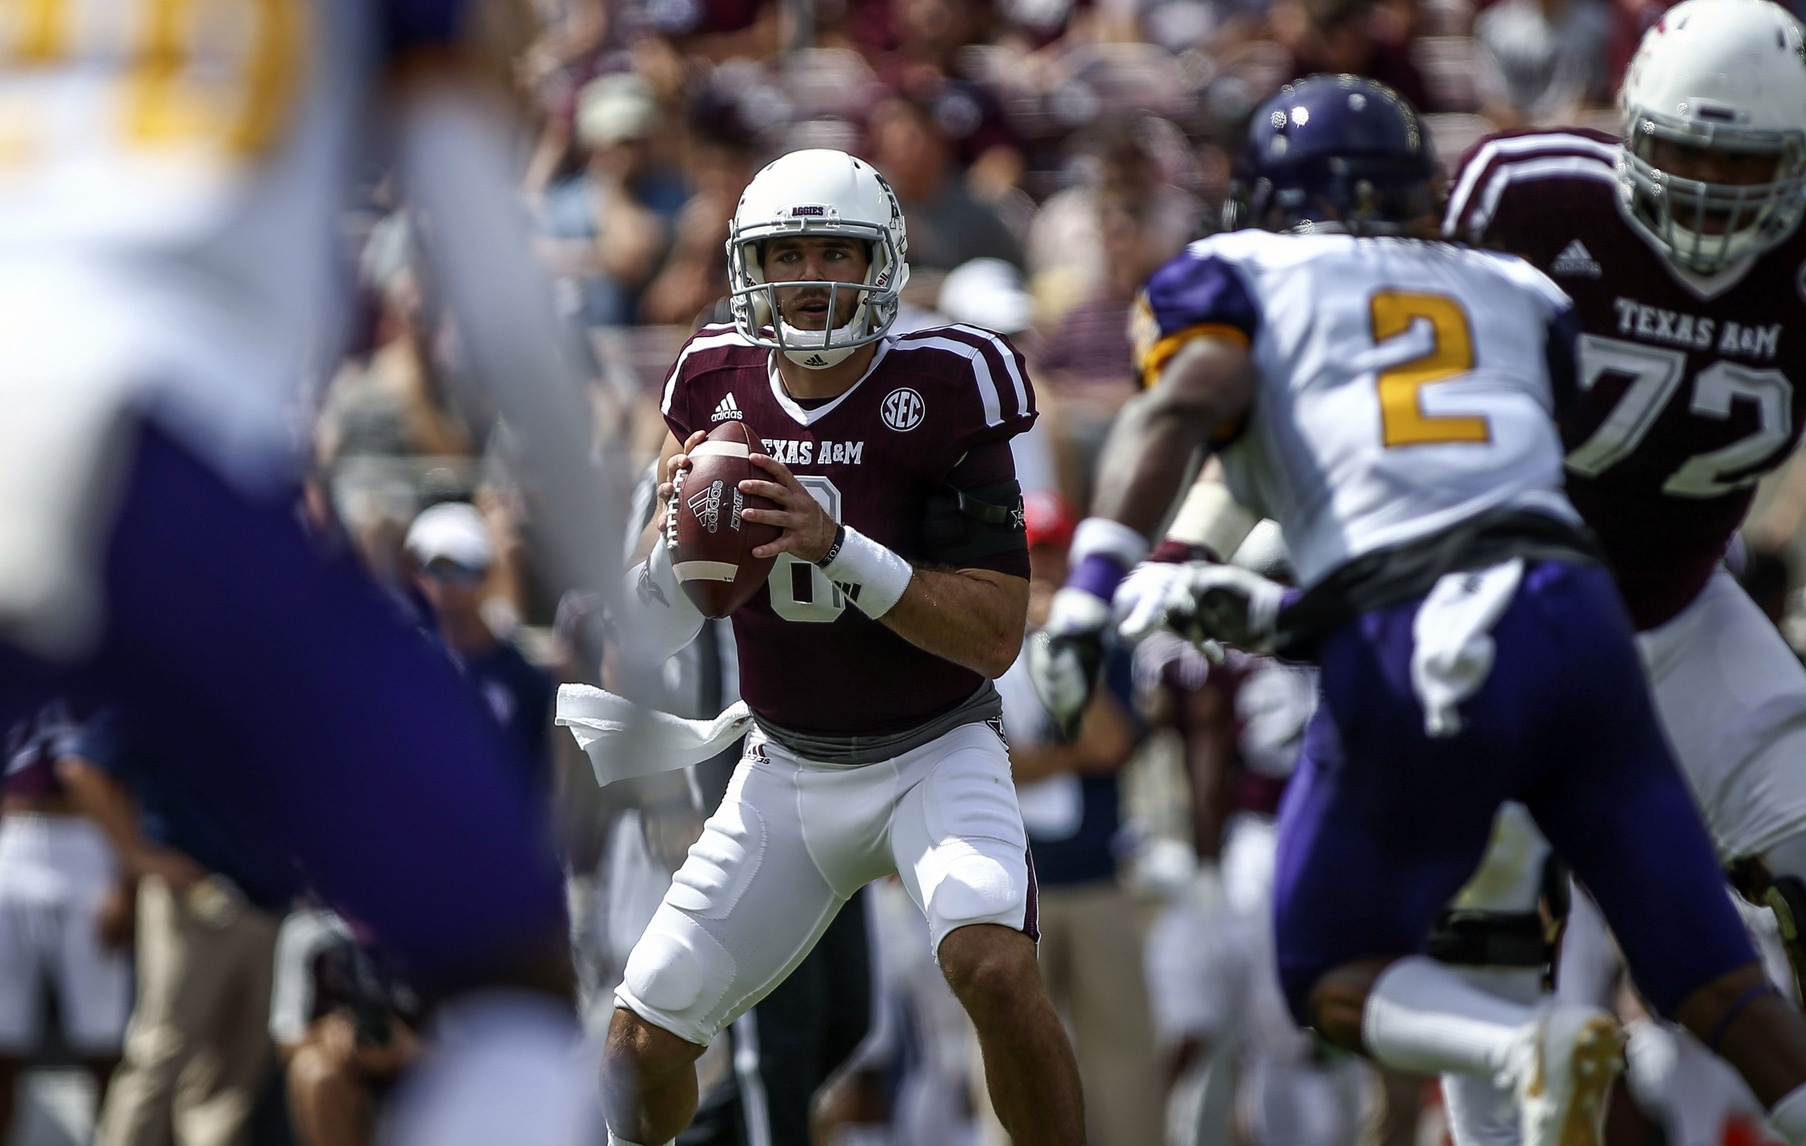 Sep 10, 2016; College Station, TX, USA; Texas A&M Aggies quarterback Trevor Knight (8) looks for an open receiver during the first quarter against the Prairie View A&M Panthers at Kyle Field. Mandatory Credit: Troy Taormina-USA TODAY Sports